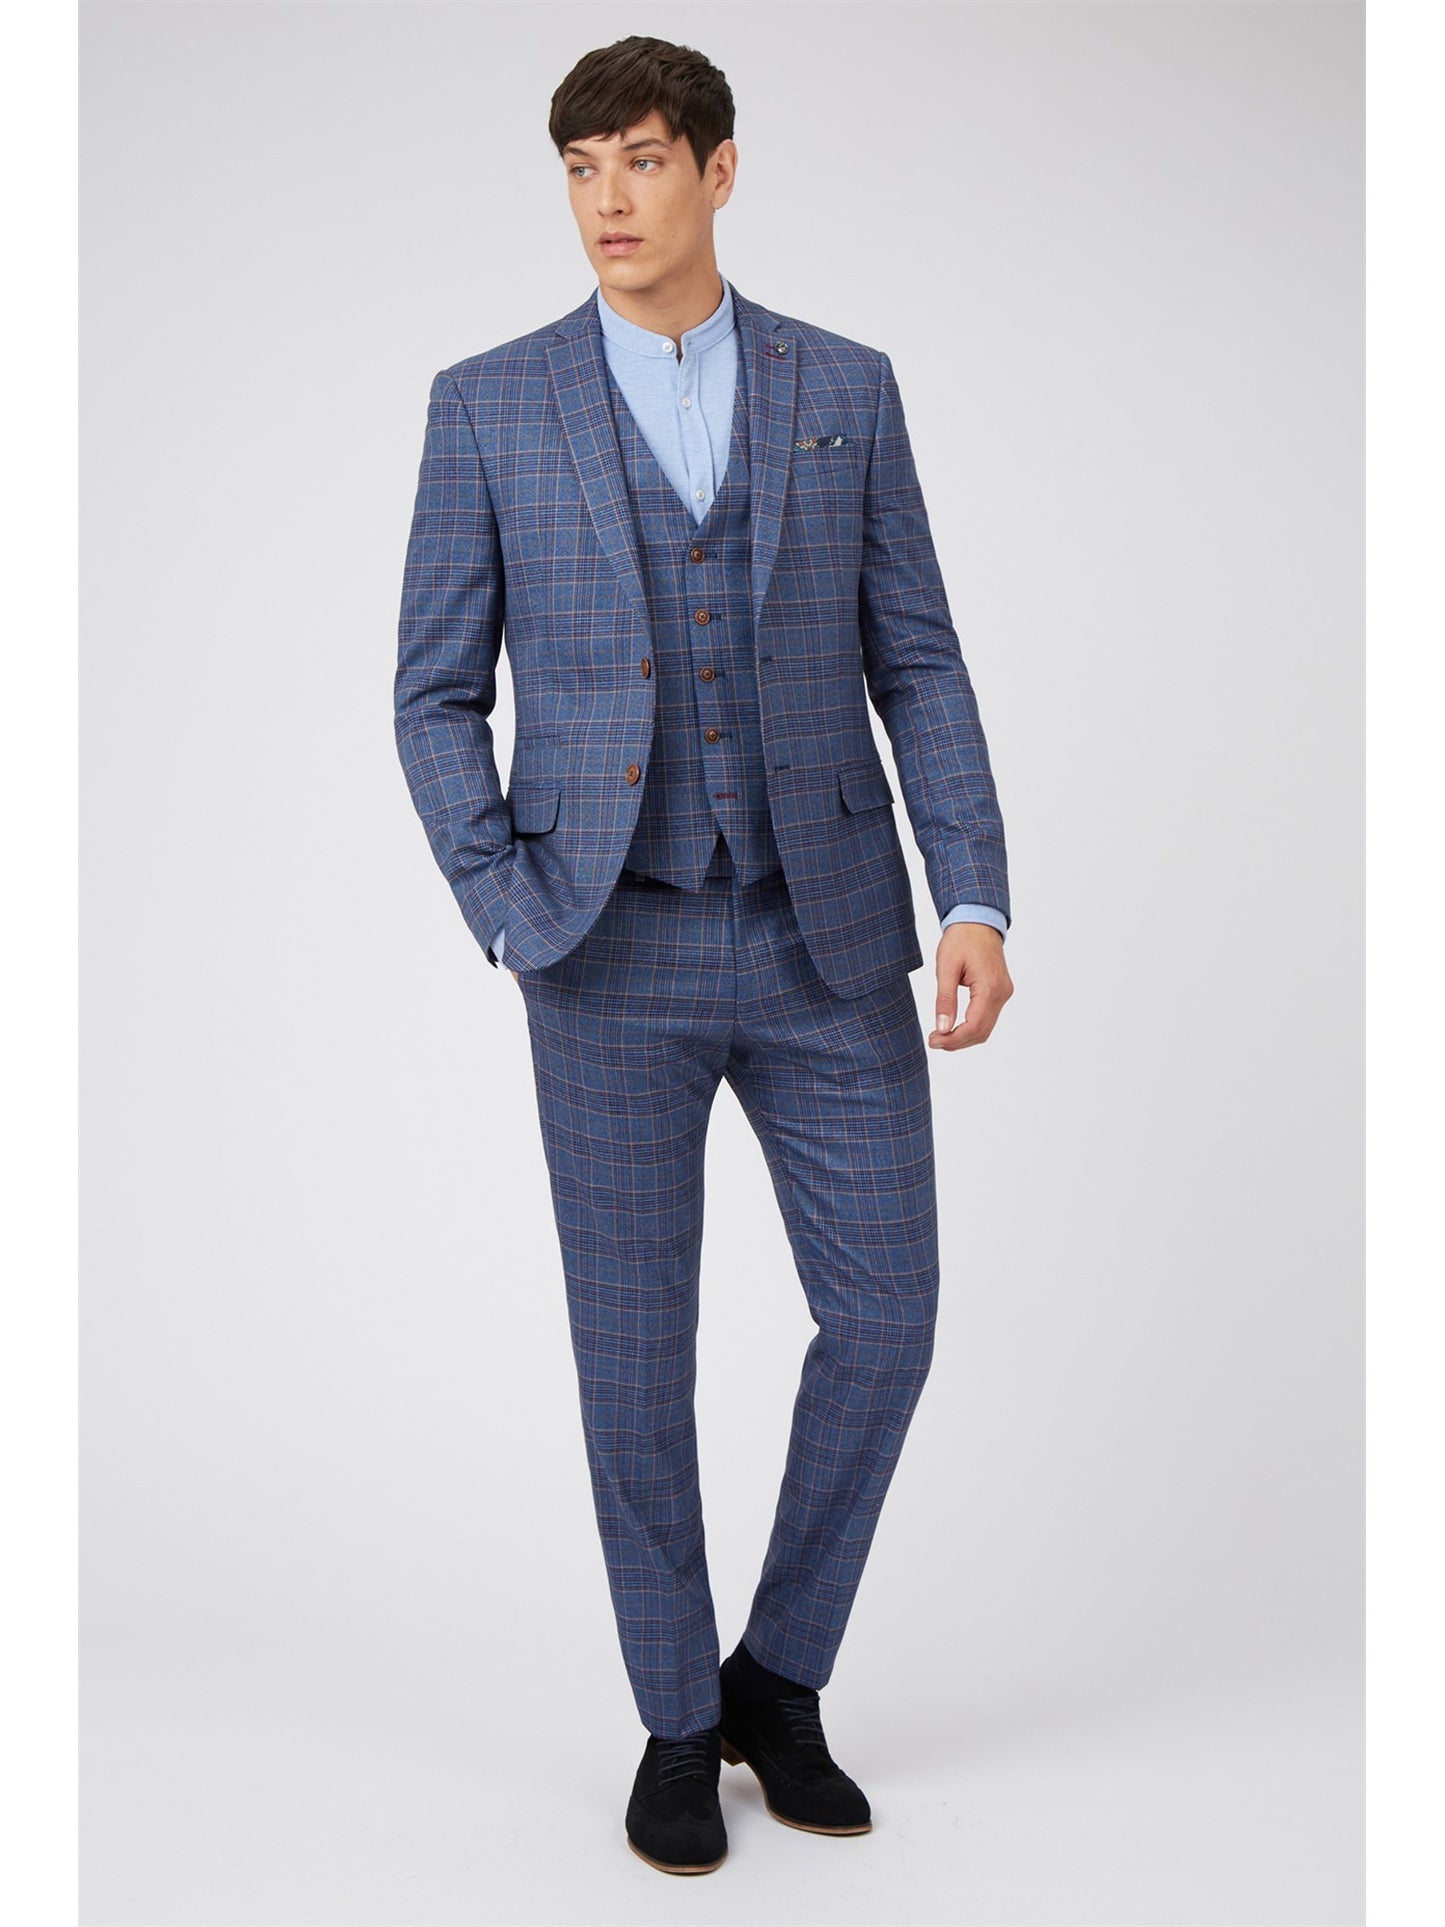 Blue Over Check from Antique Rogue - Trousers